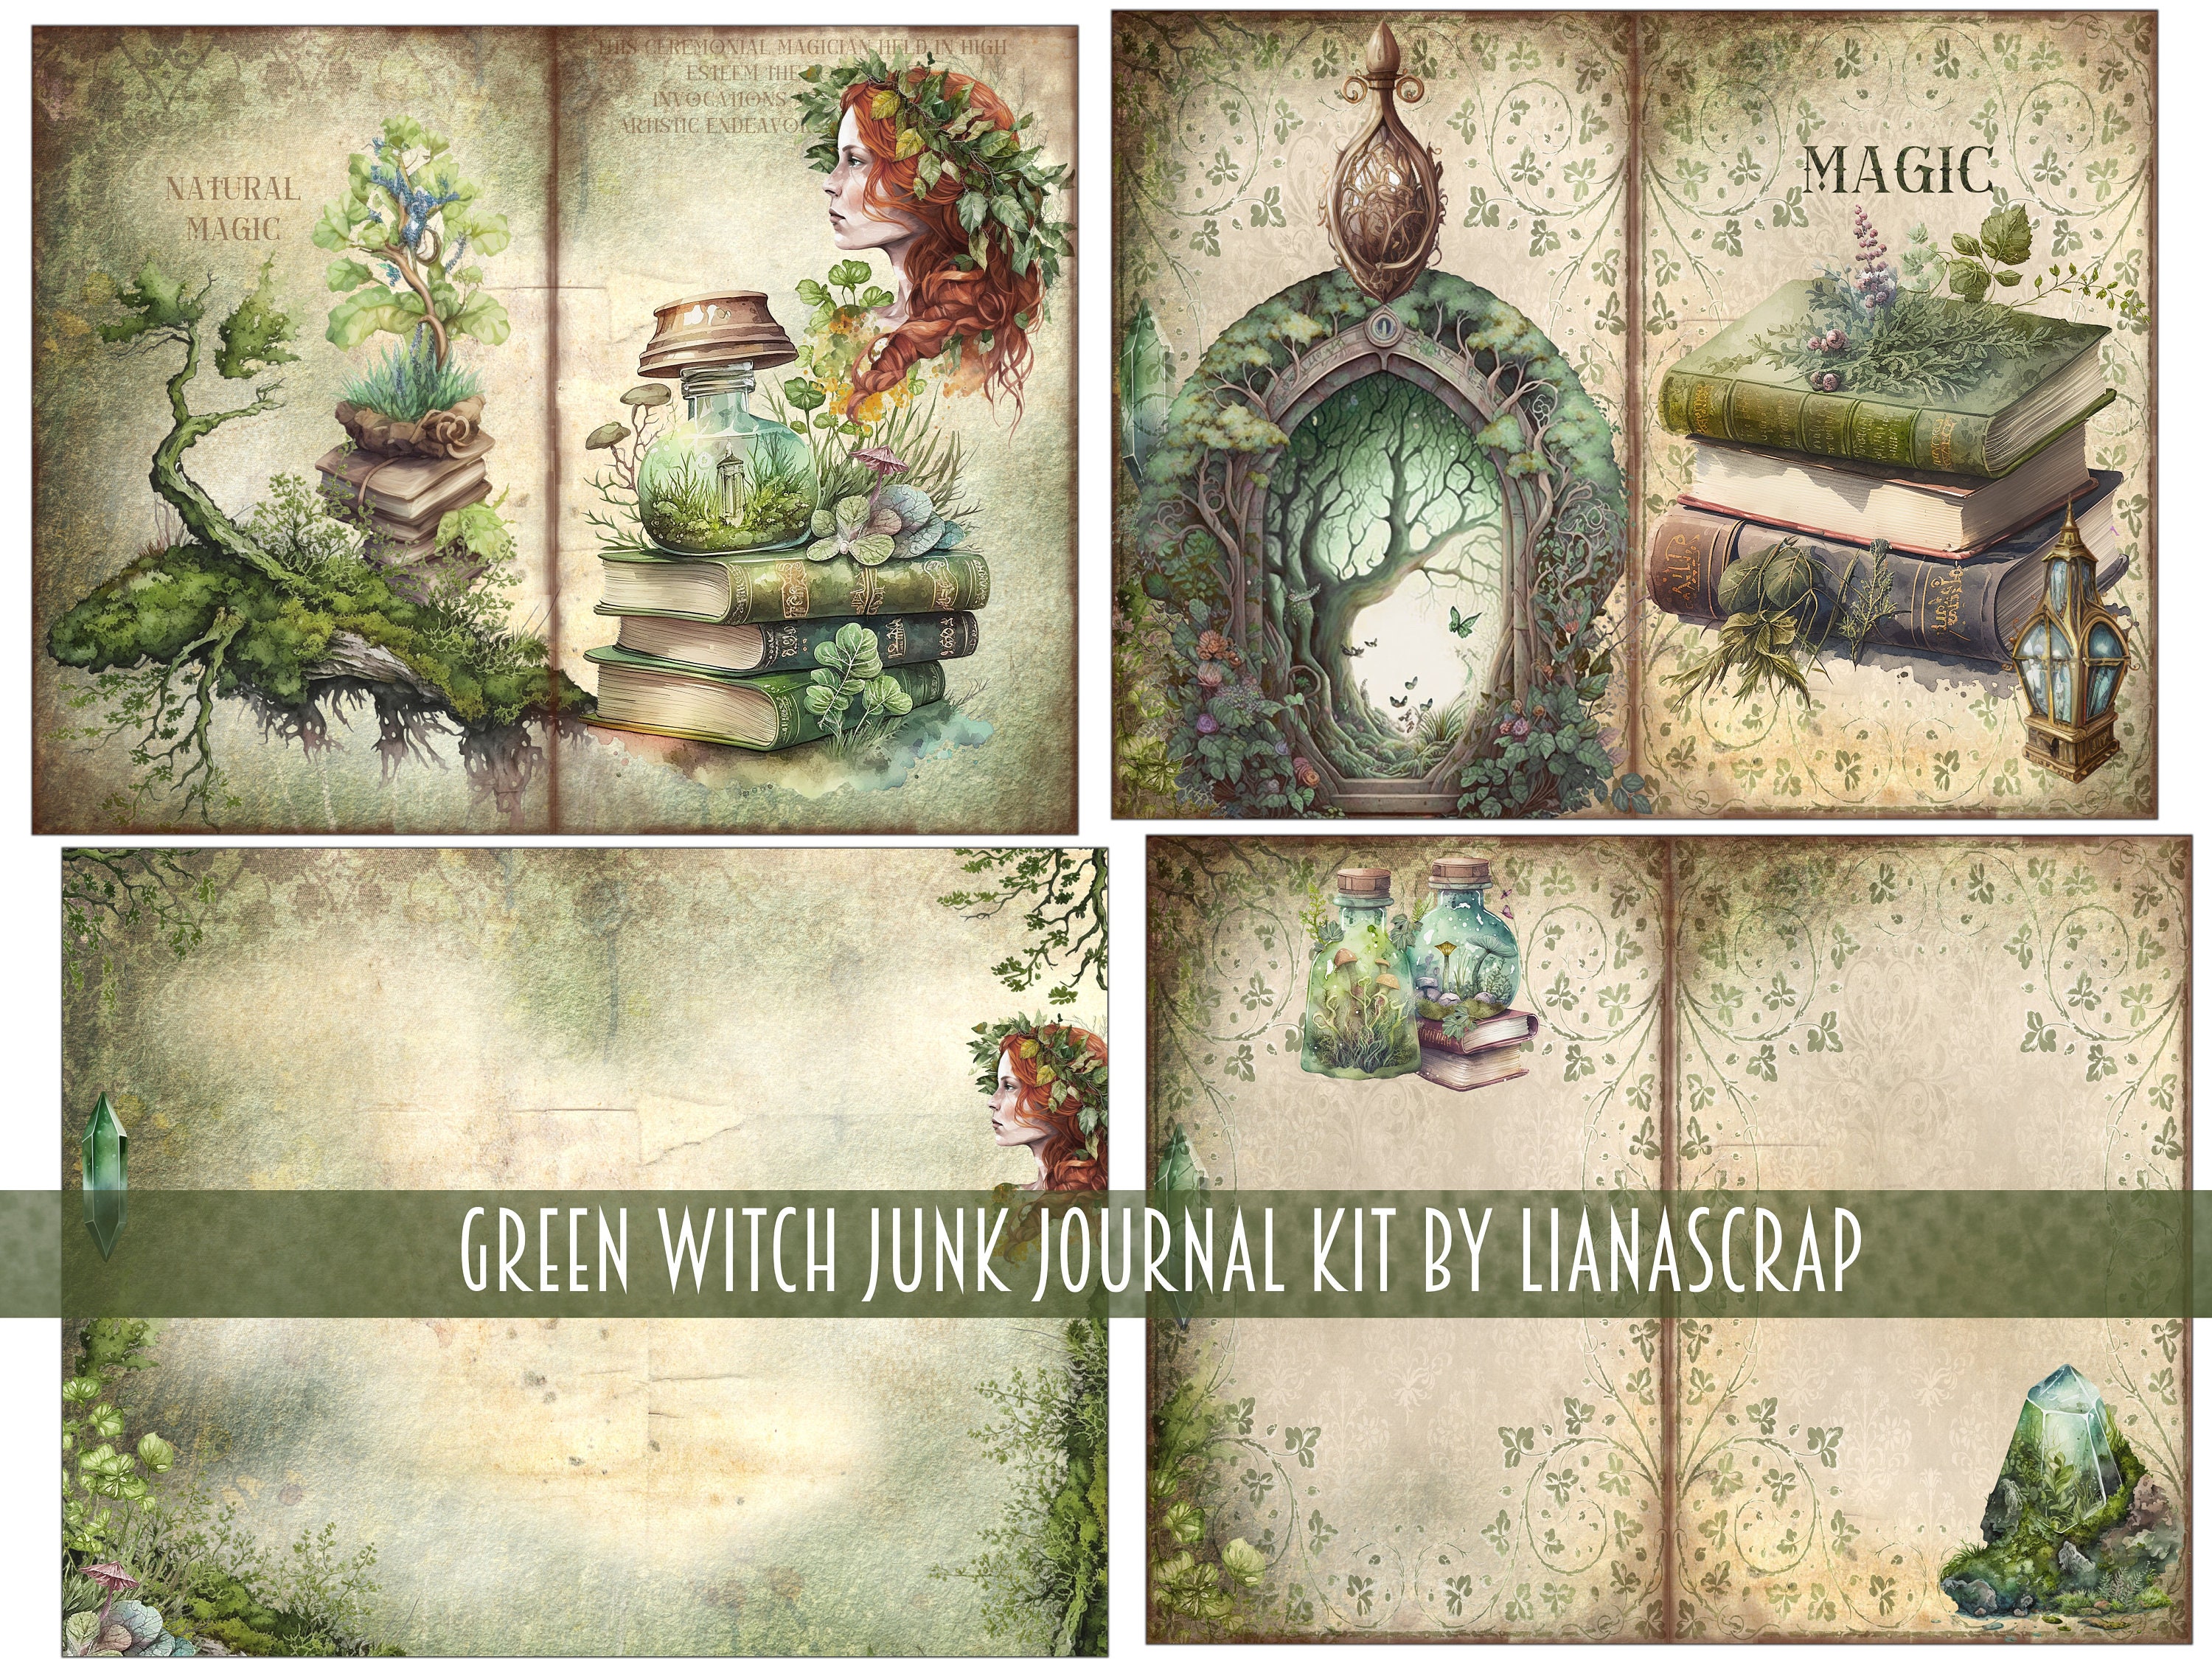 Buy Book of Spells Crafting Printables Kit, Craft Kits, Junk Journal  Printable, White Witch Journal, Magic Junk Journal, Supplies Kit 002249  Online in India 